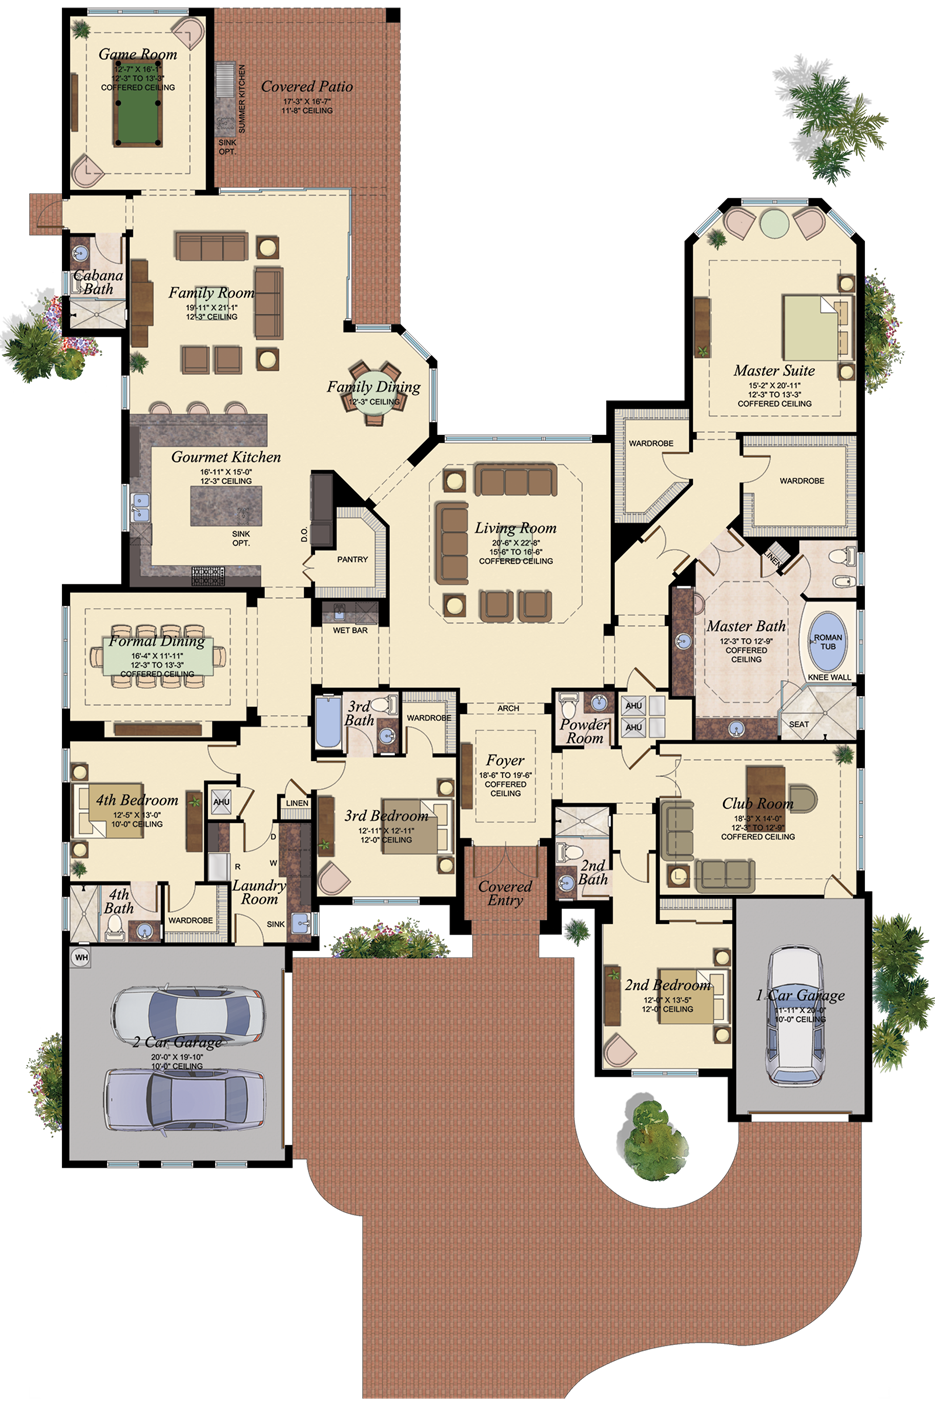 Sims Area Freeplay Residential Floor Plan PNG Image